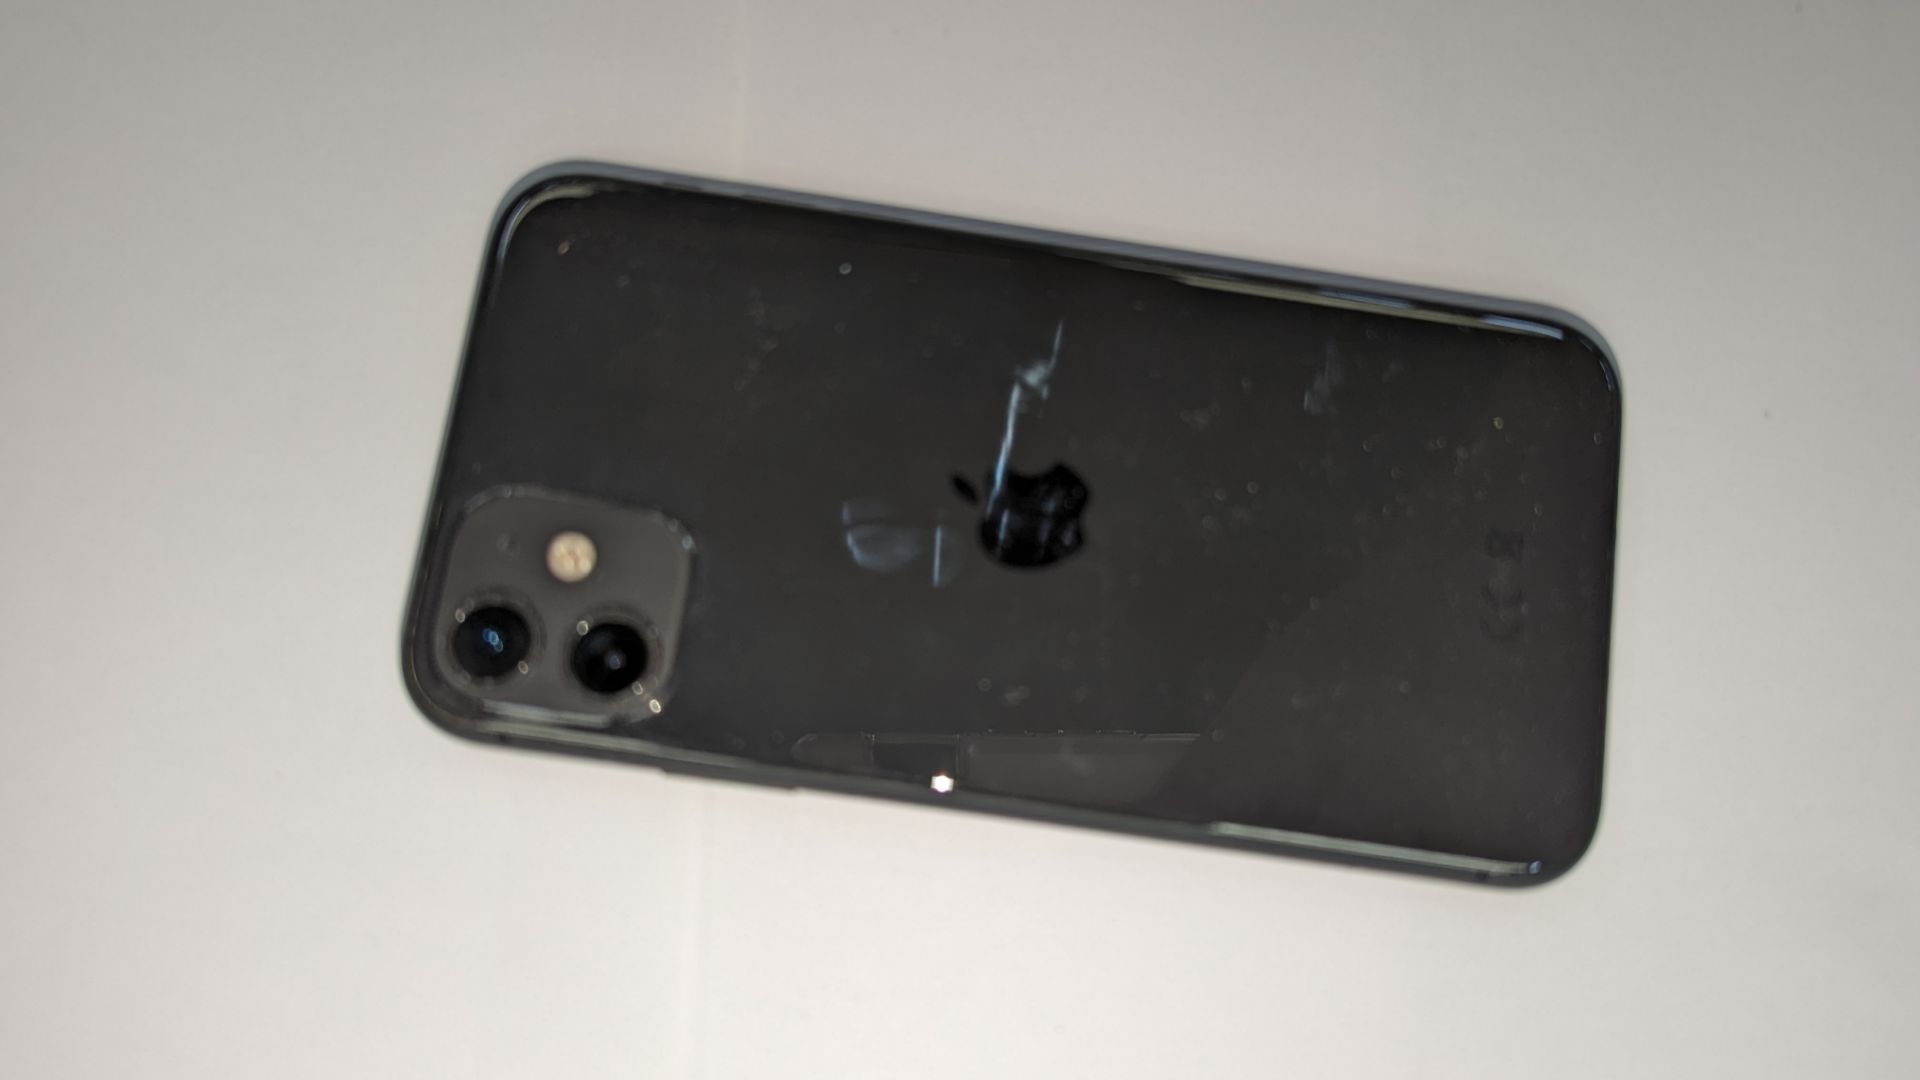 Apple iPhone 11, 64GB capacity, model A2221 (MWLT2B/A). NB1 damage/crack to screen. NB2 no box - Image 8 of 16